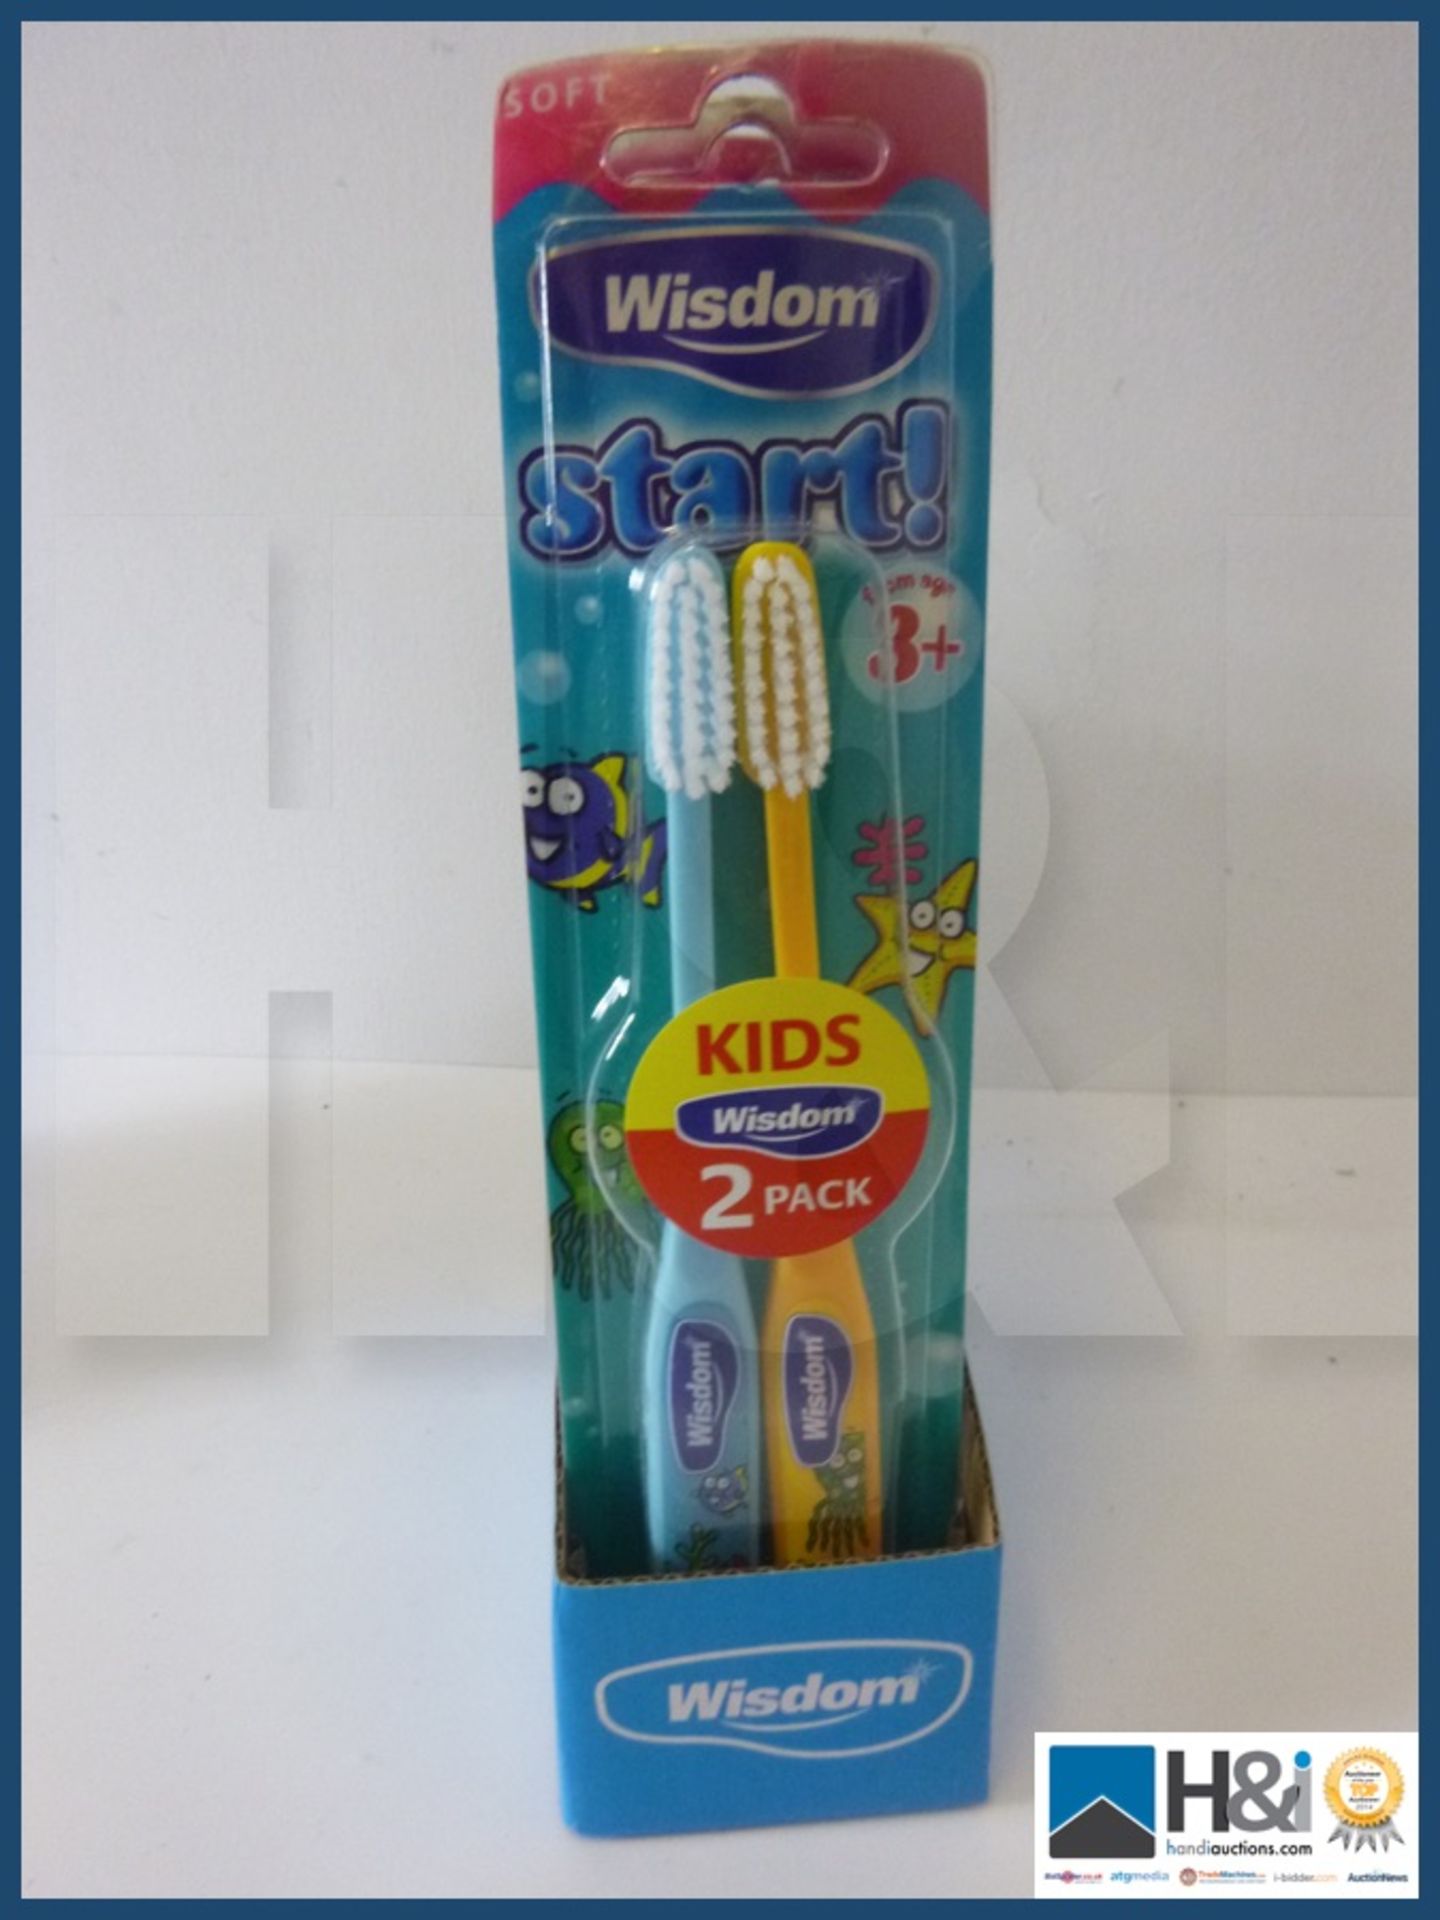 Lot of new Wisdom toothbrushes 6 adult twin packs and 6 children's twin packs . - Image 2 of 4